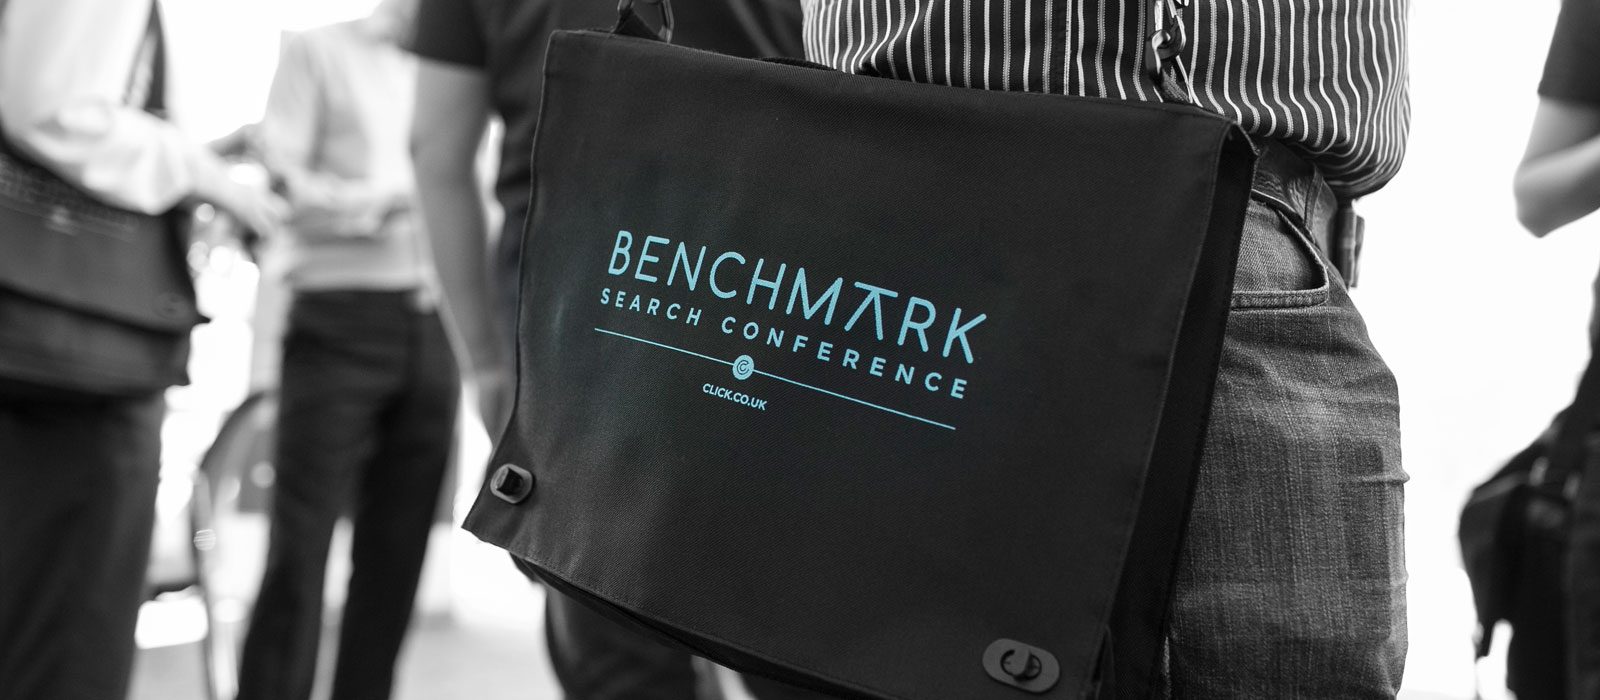 Benchmark search conference 2015 header